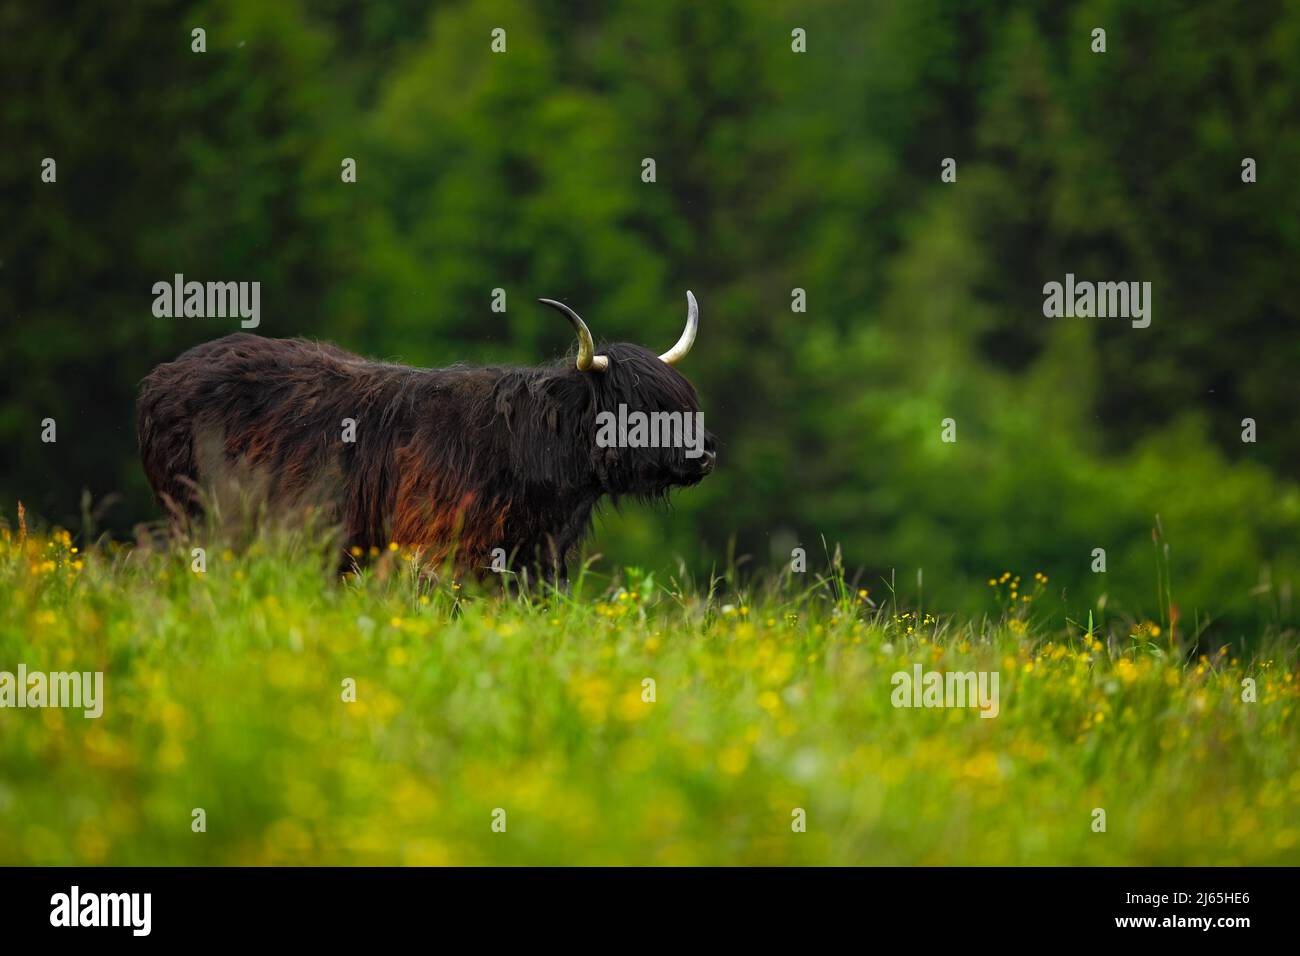 Highland cattle, big animal in the flowered meadow, they have long horns and long wavy coats that are coloured black, brindle, red, and they are often Stock Photo